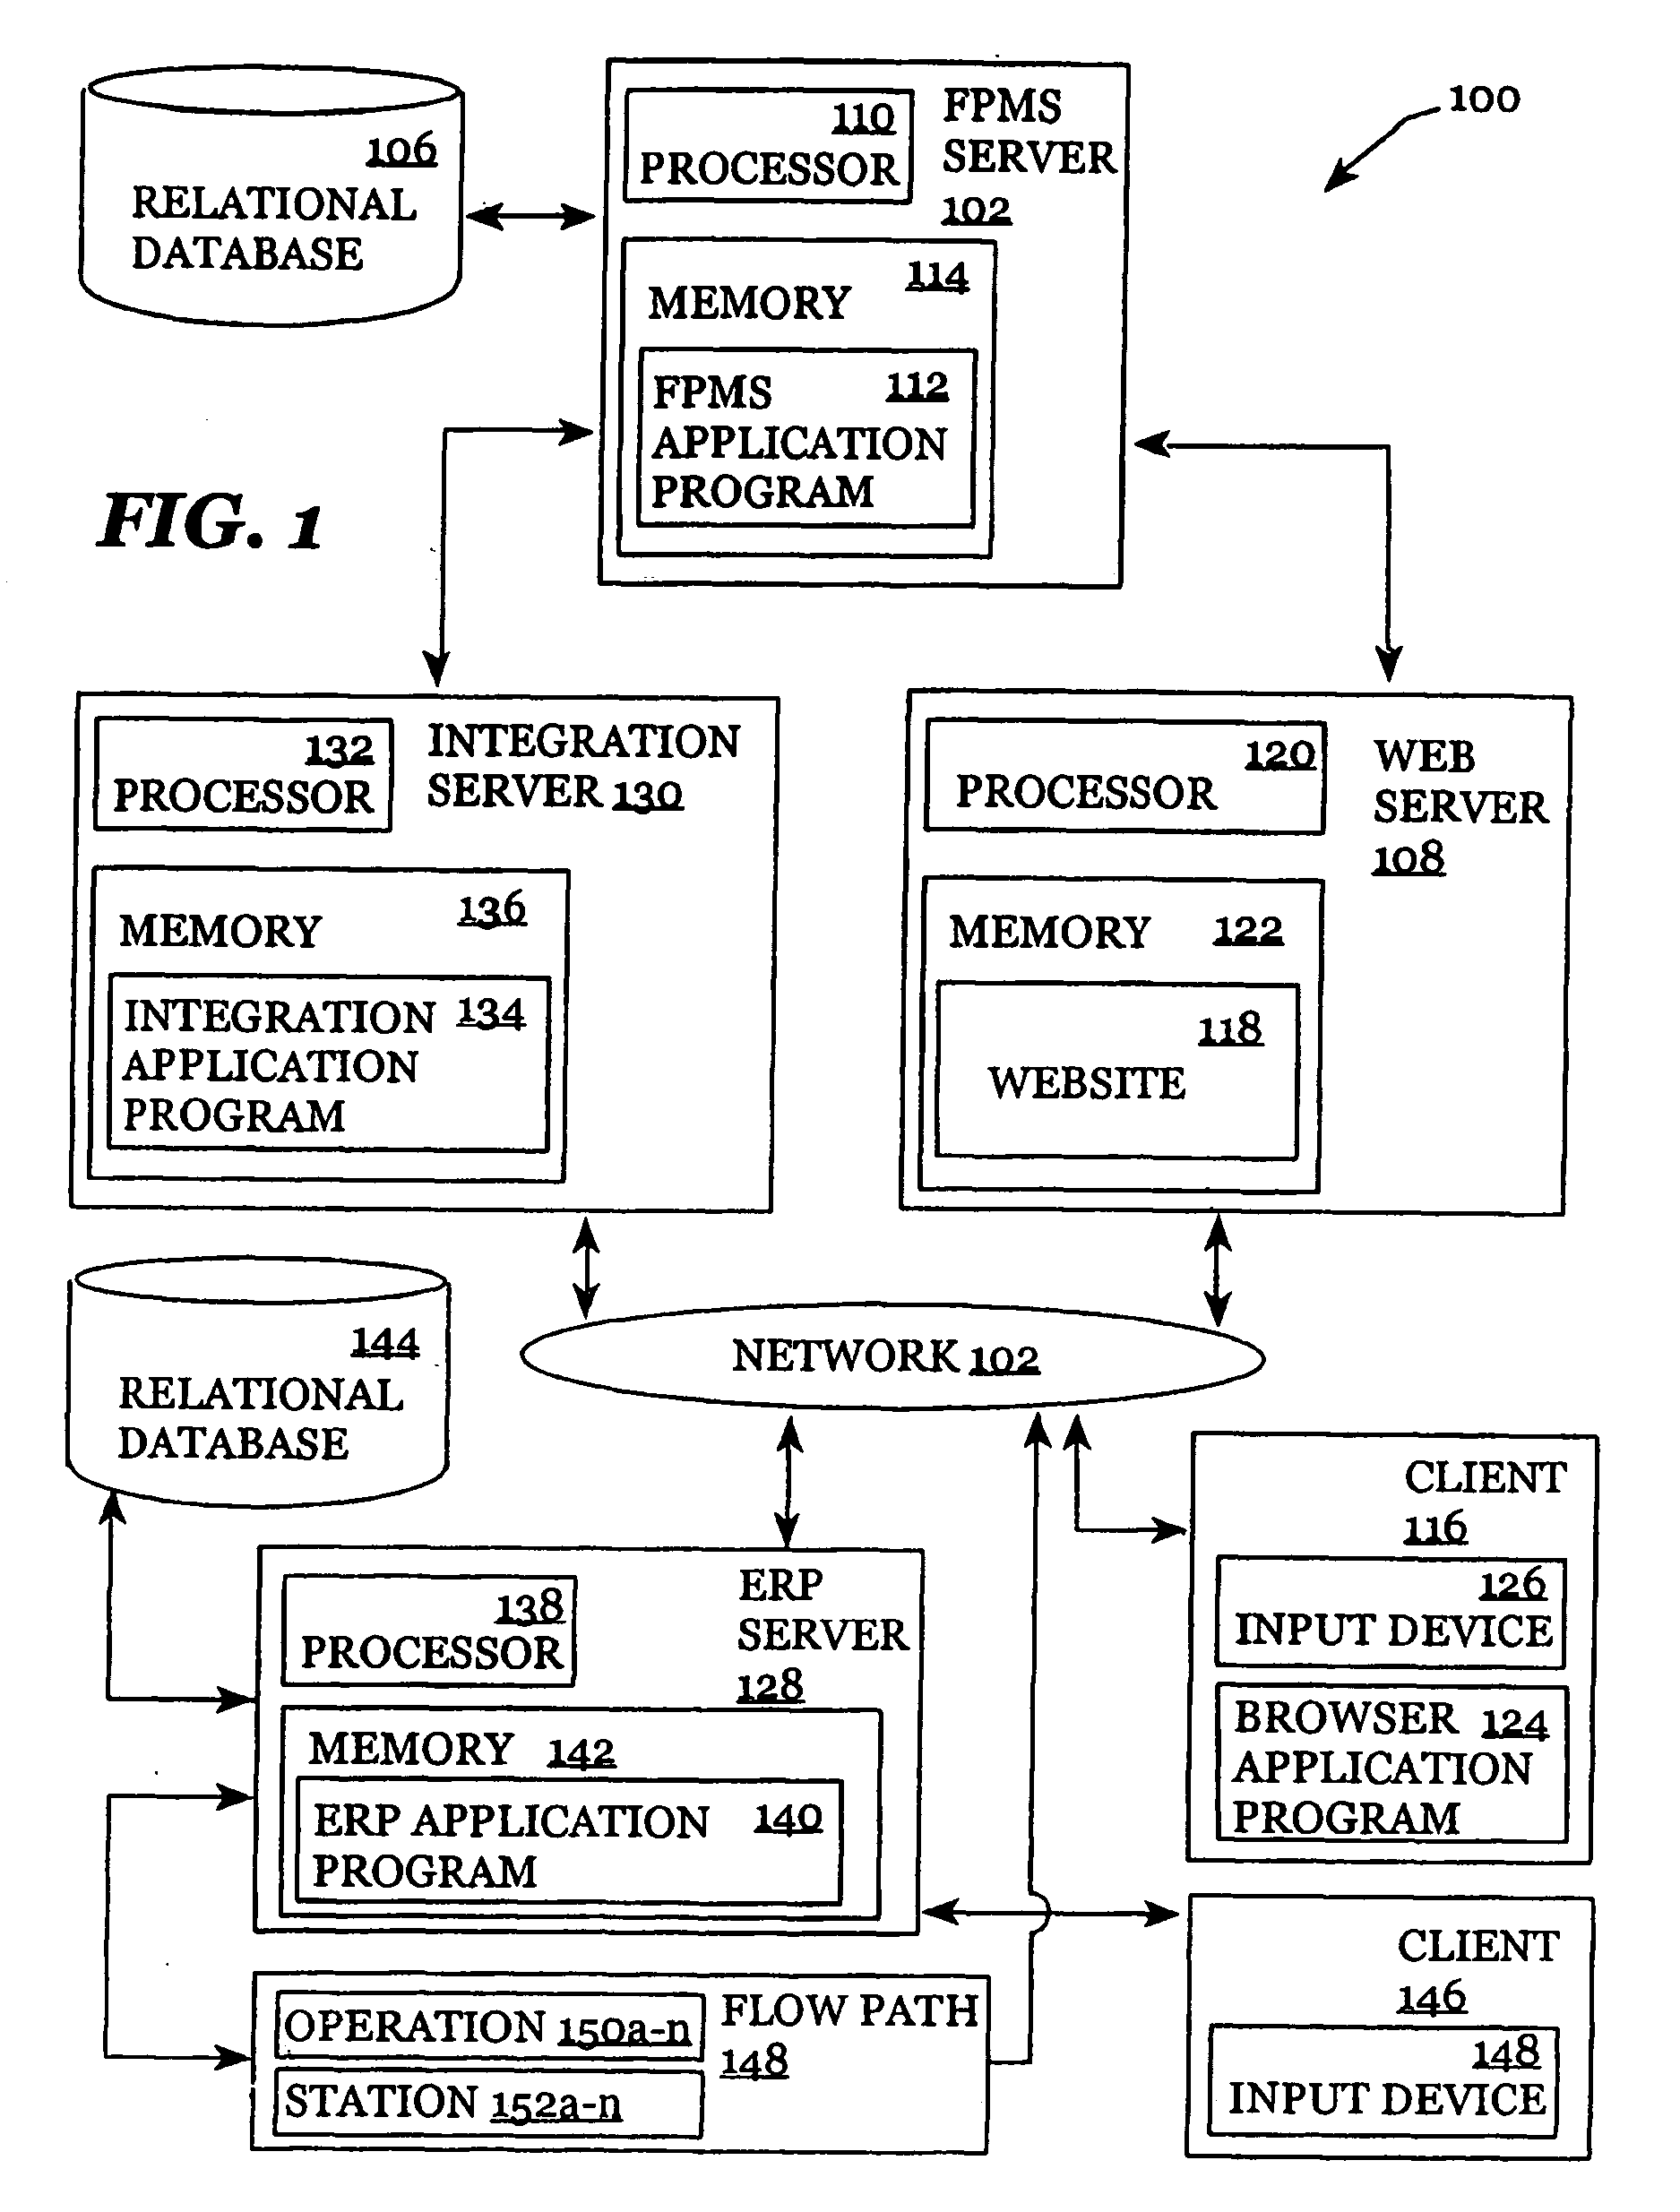 Associated systems and methods for improving planning, scheduling, and supply chain management